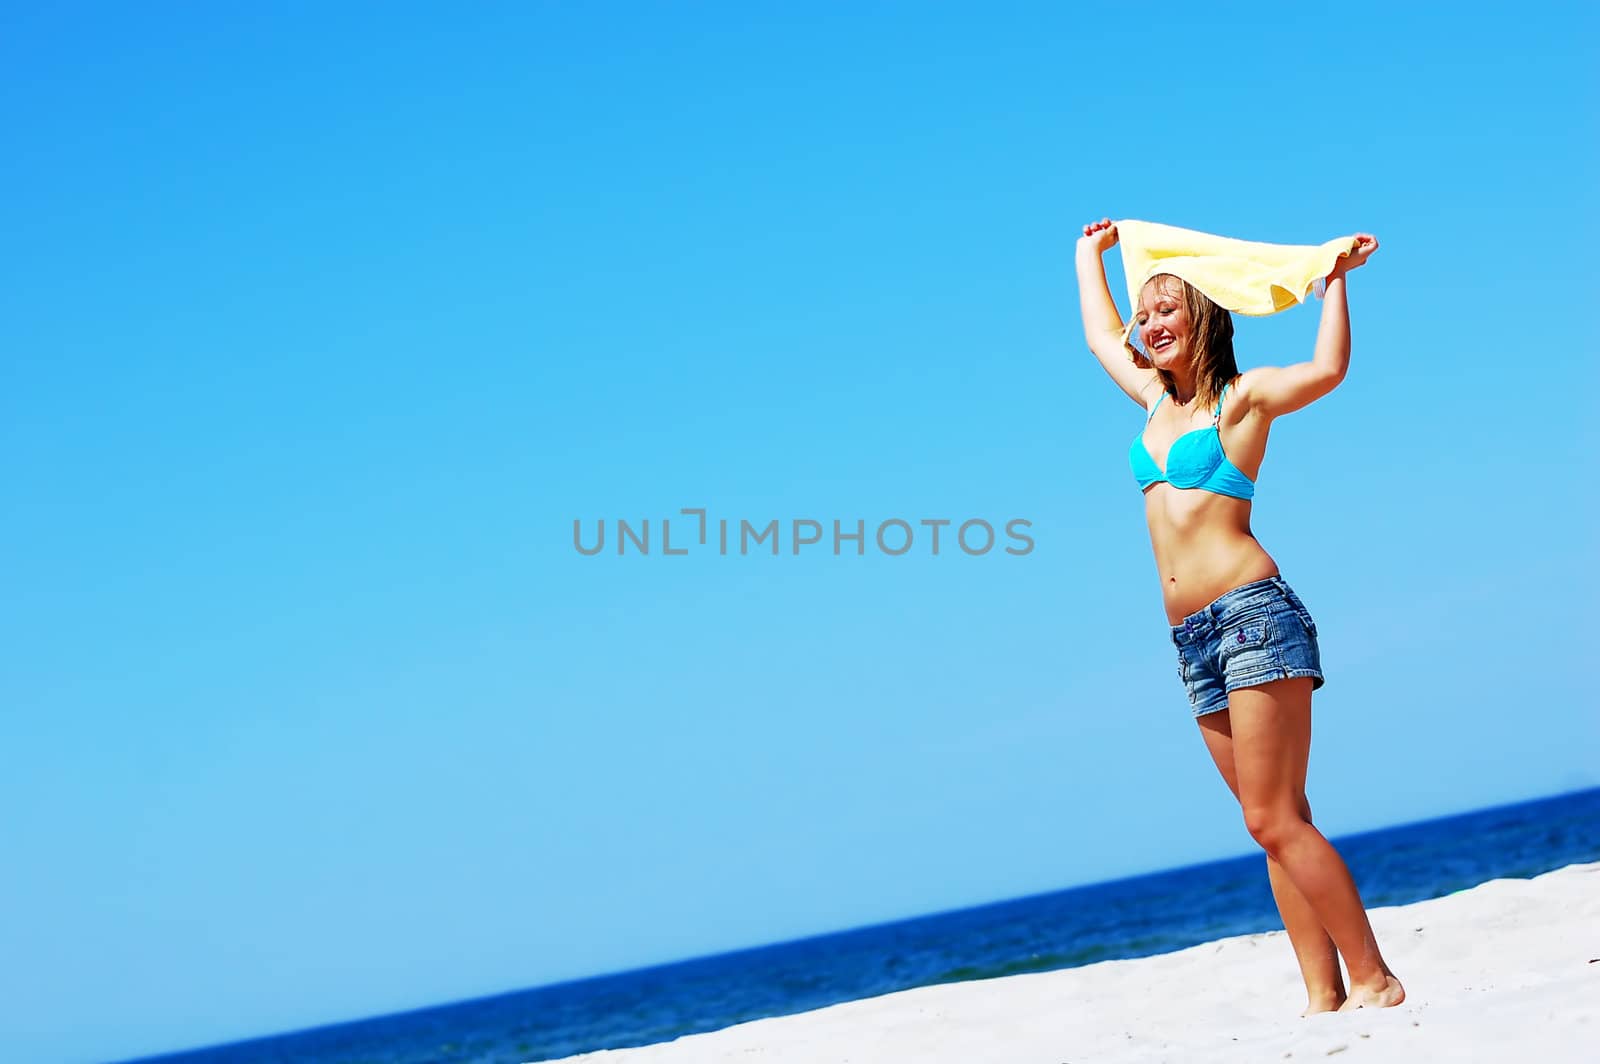 Enyoing summertime by photocreo